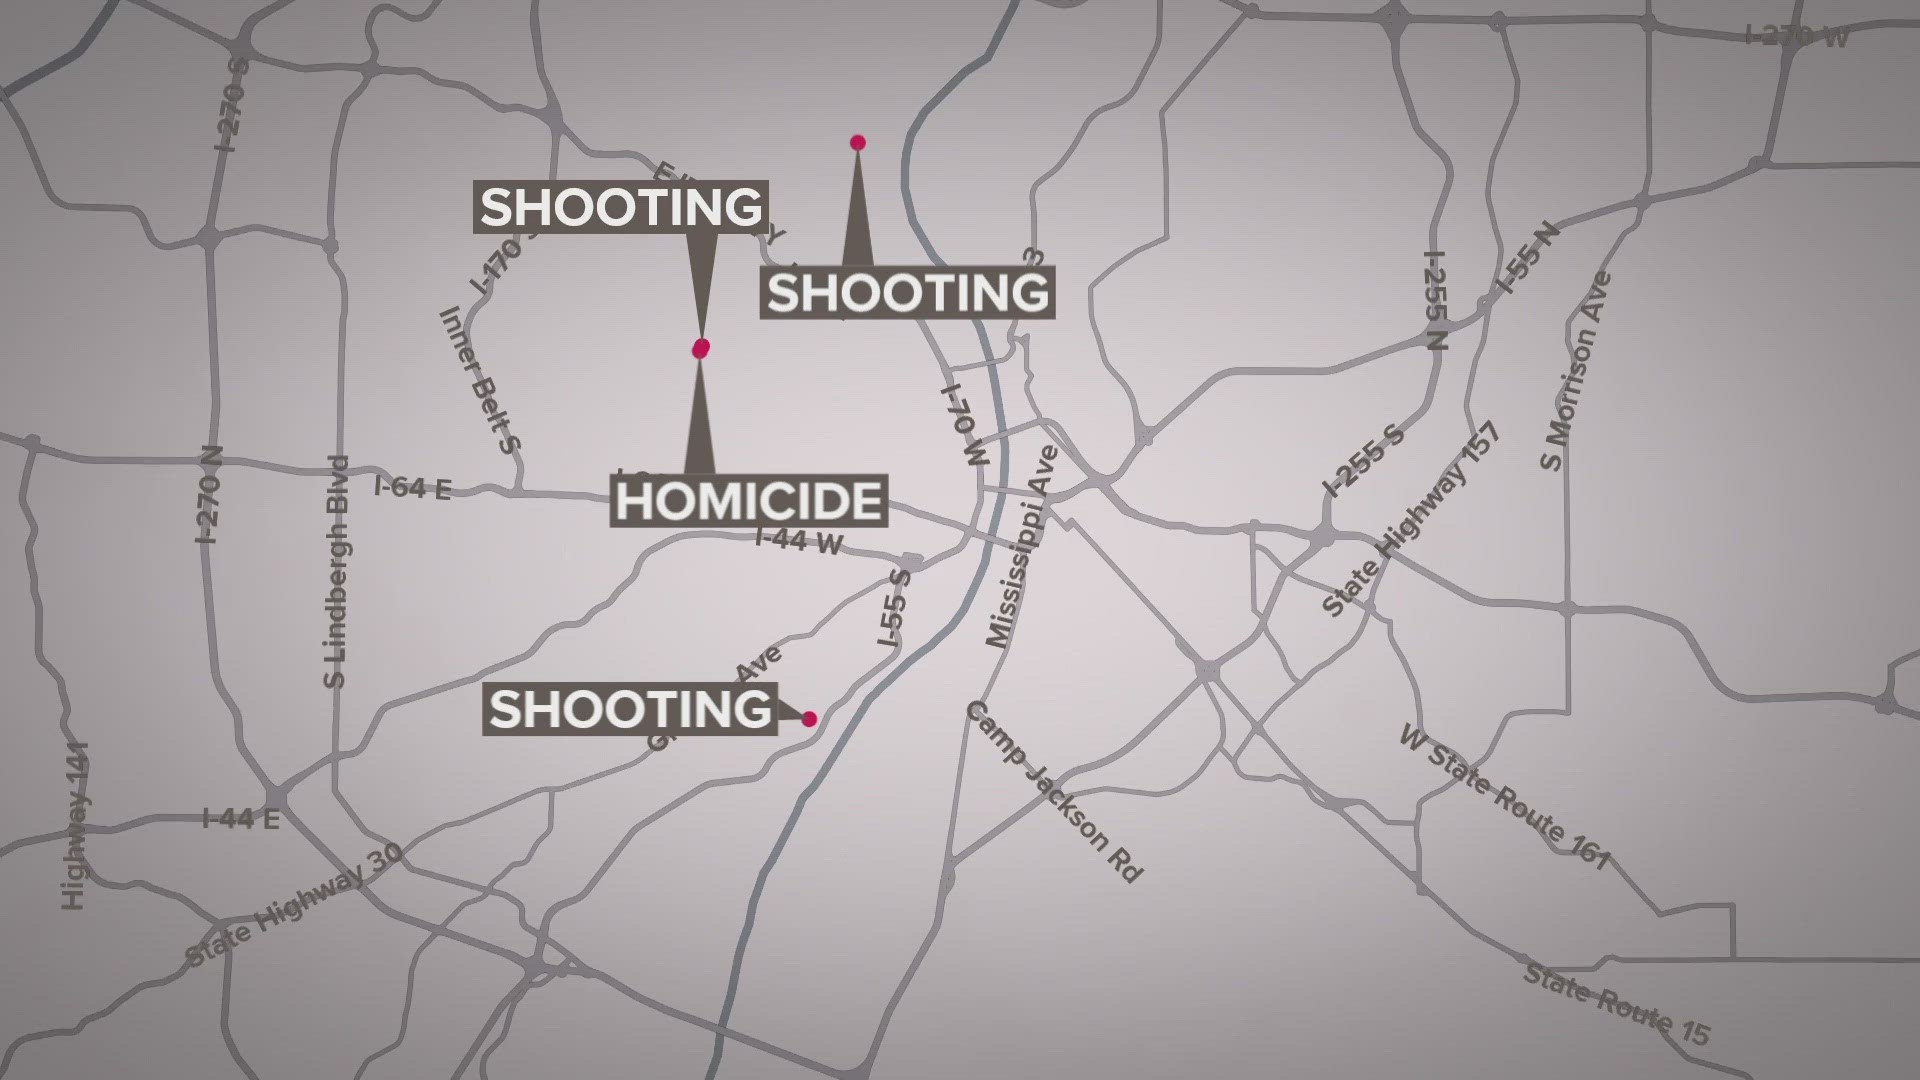 One person was killed and four others were injured in four separate shootings overnight in St. Louis. The deadly shooting happened in on Minerva Avenue.